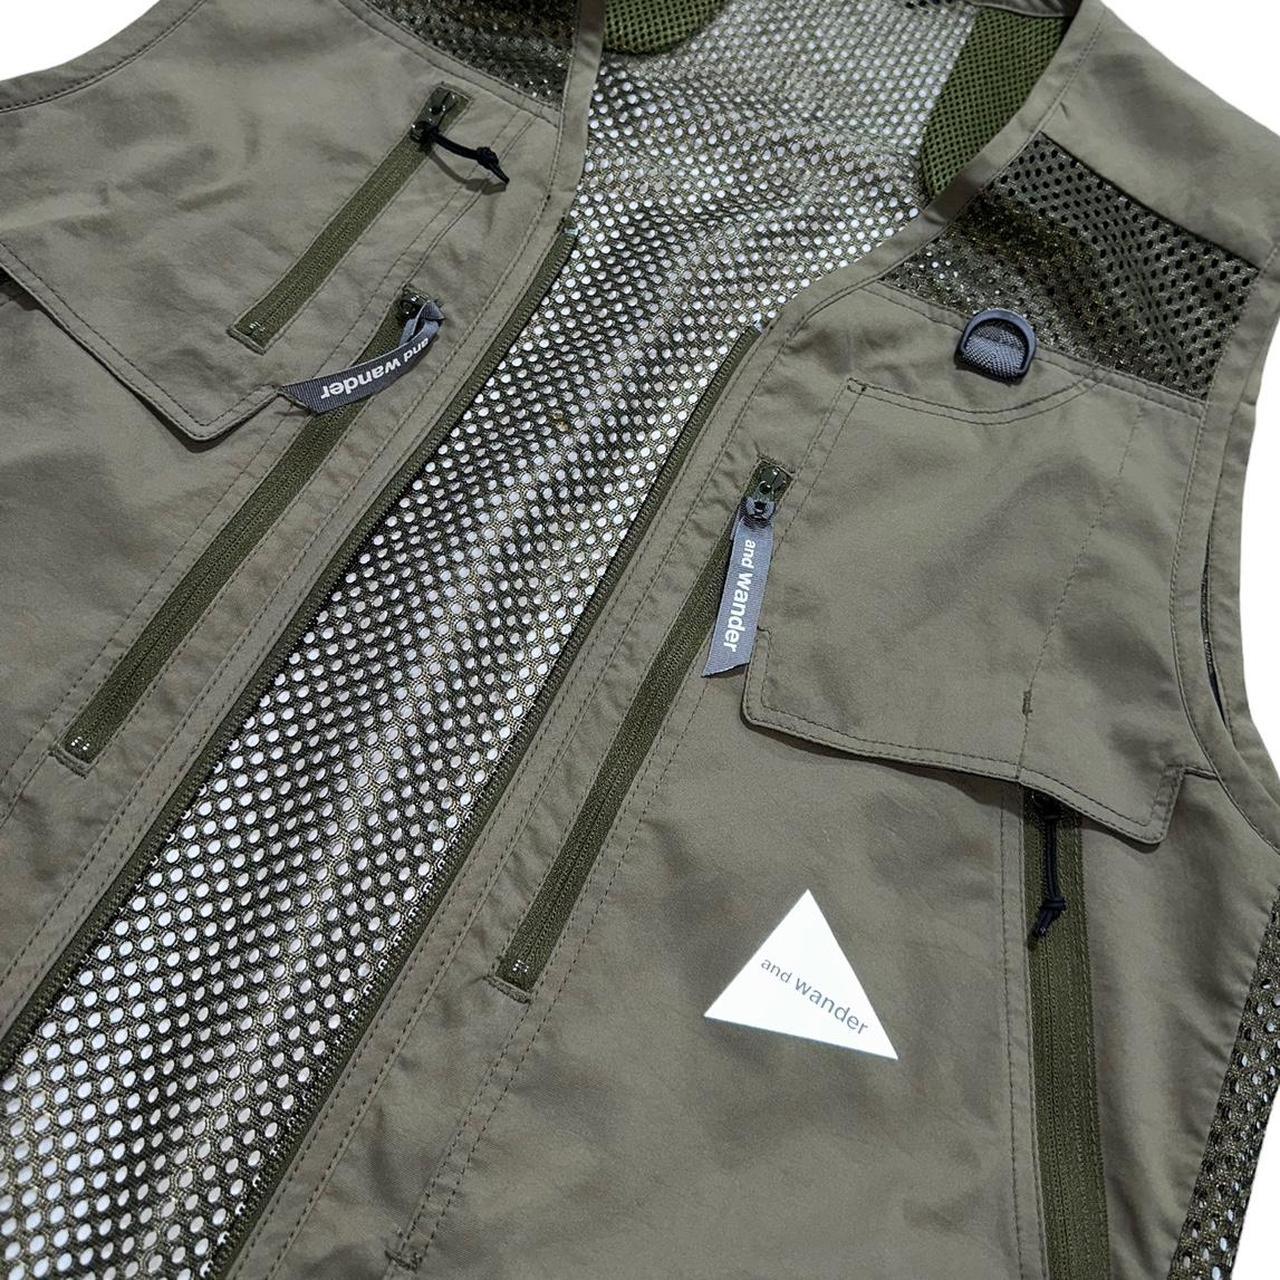 And Wander Tactical Vest - Known Source